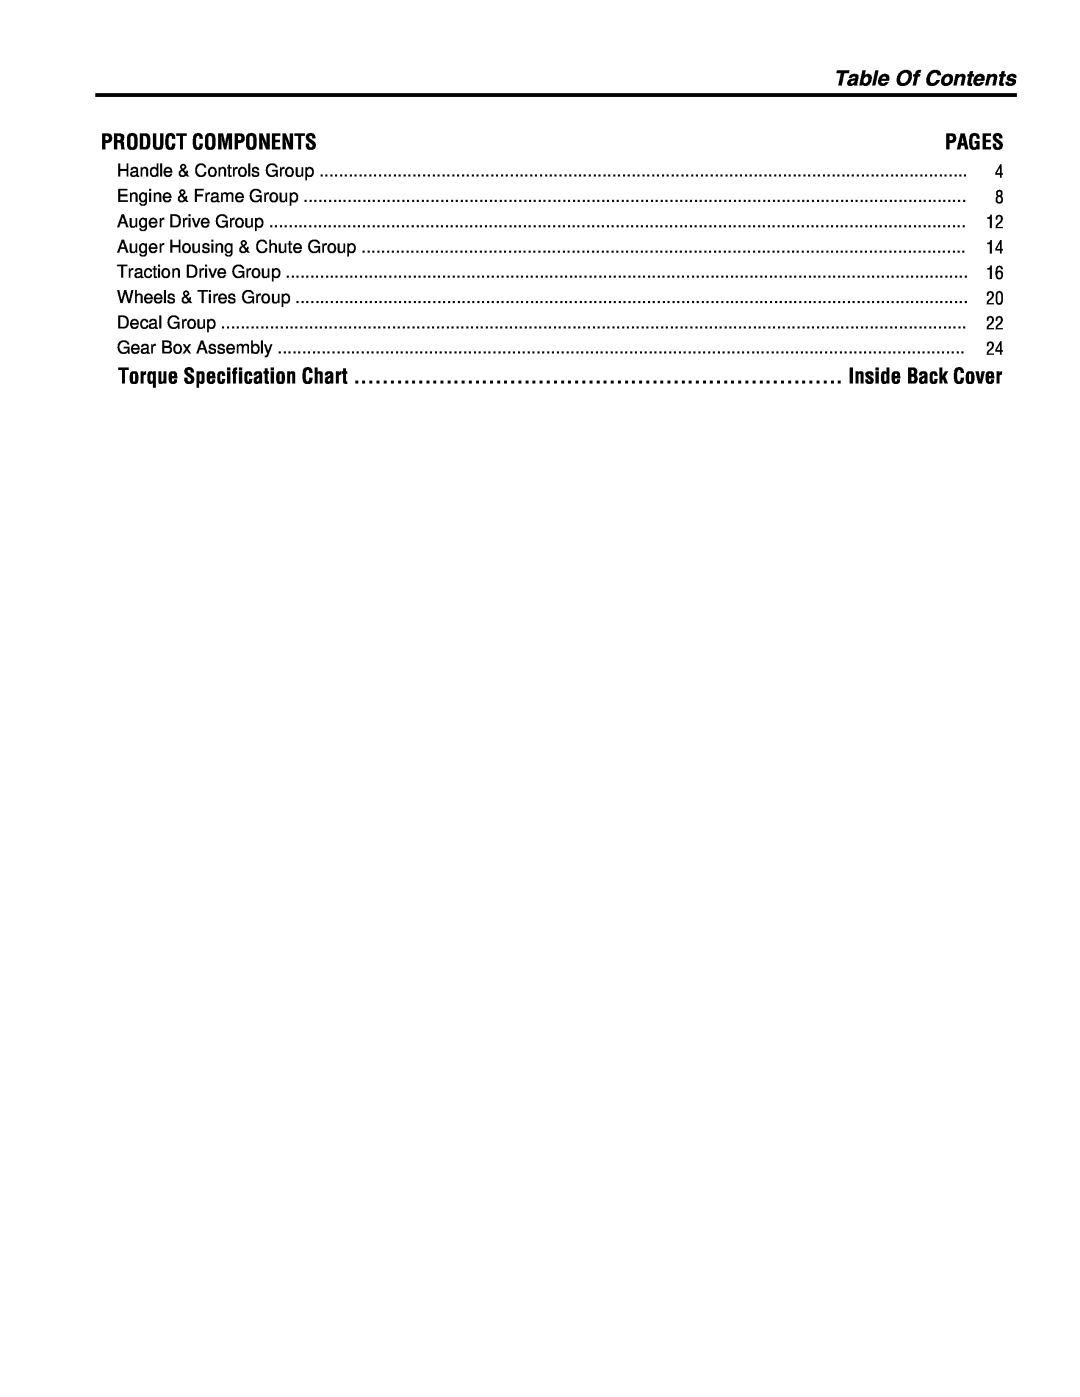 Simplicity 1695307, 1695310 Table Of Contents, Product Components, Pages, Torque Specification Chart, Inside Back Cover 